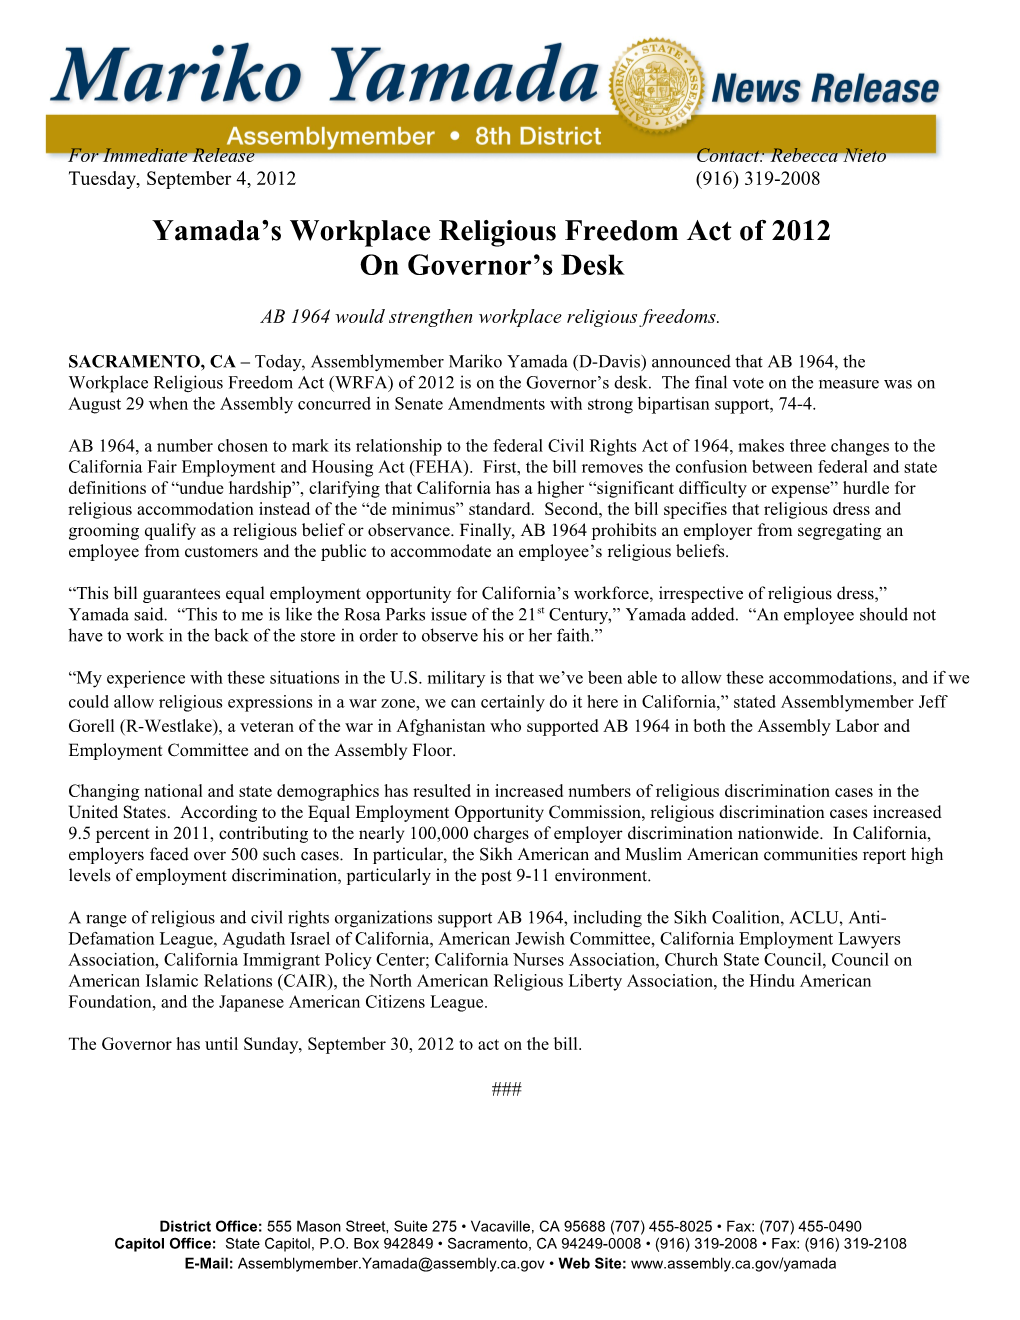 Yamada S Workplace Religious Freedom Act of 2012